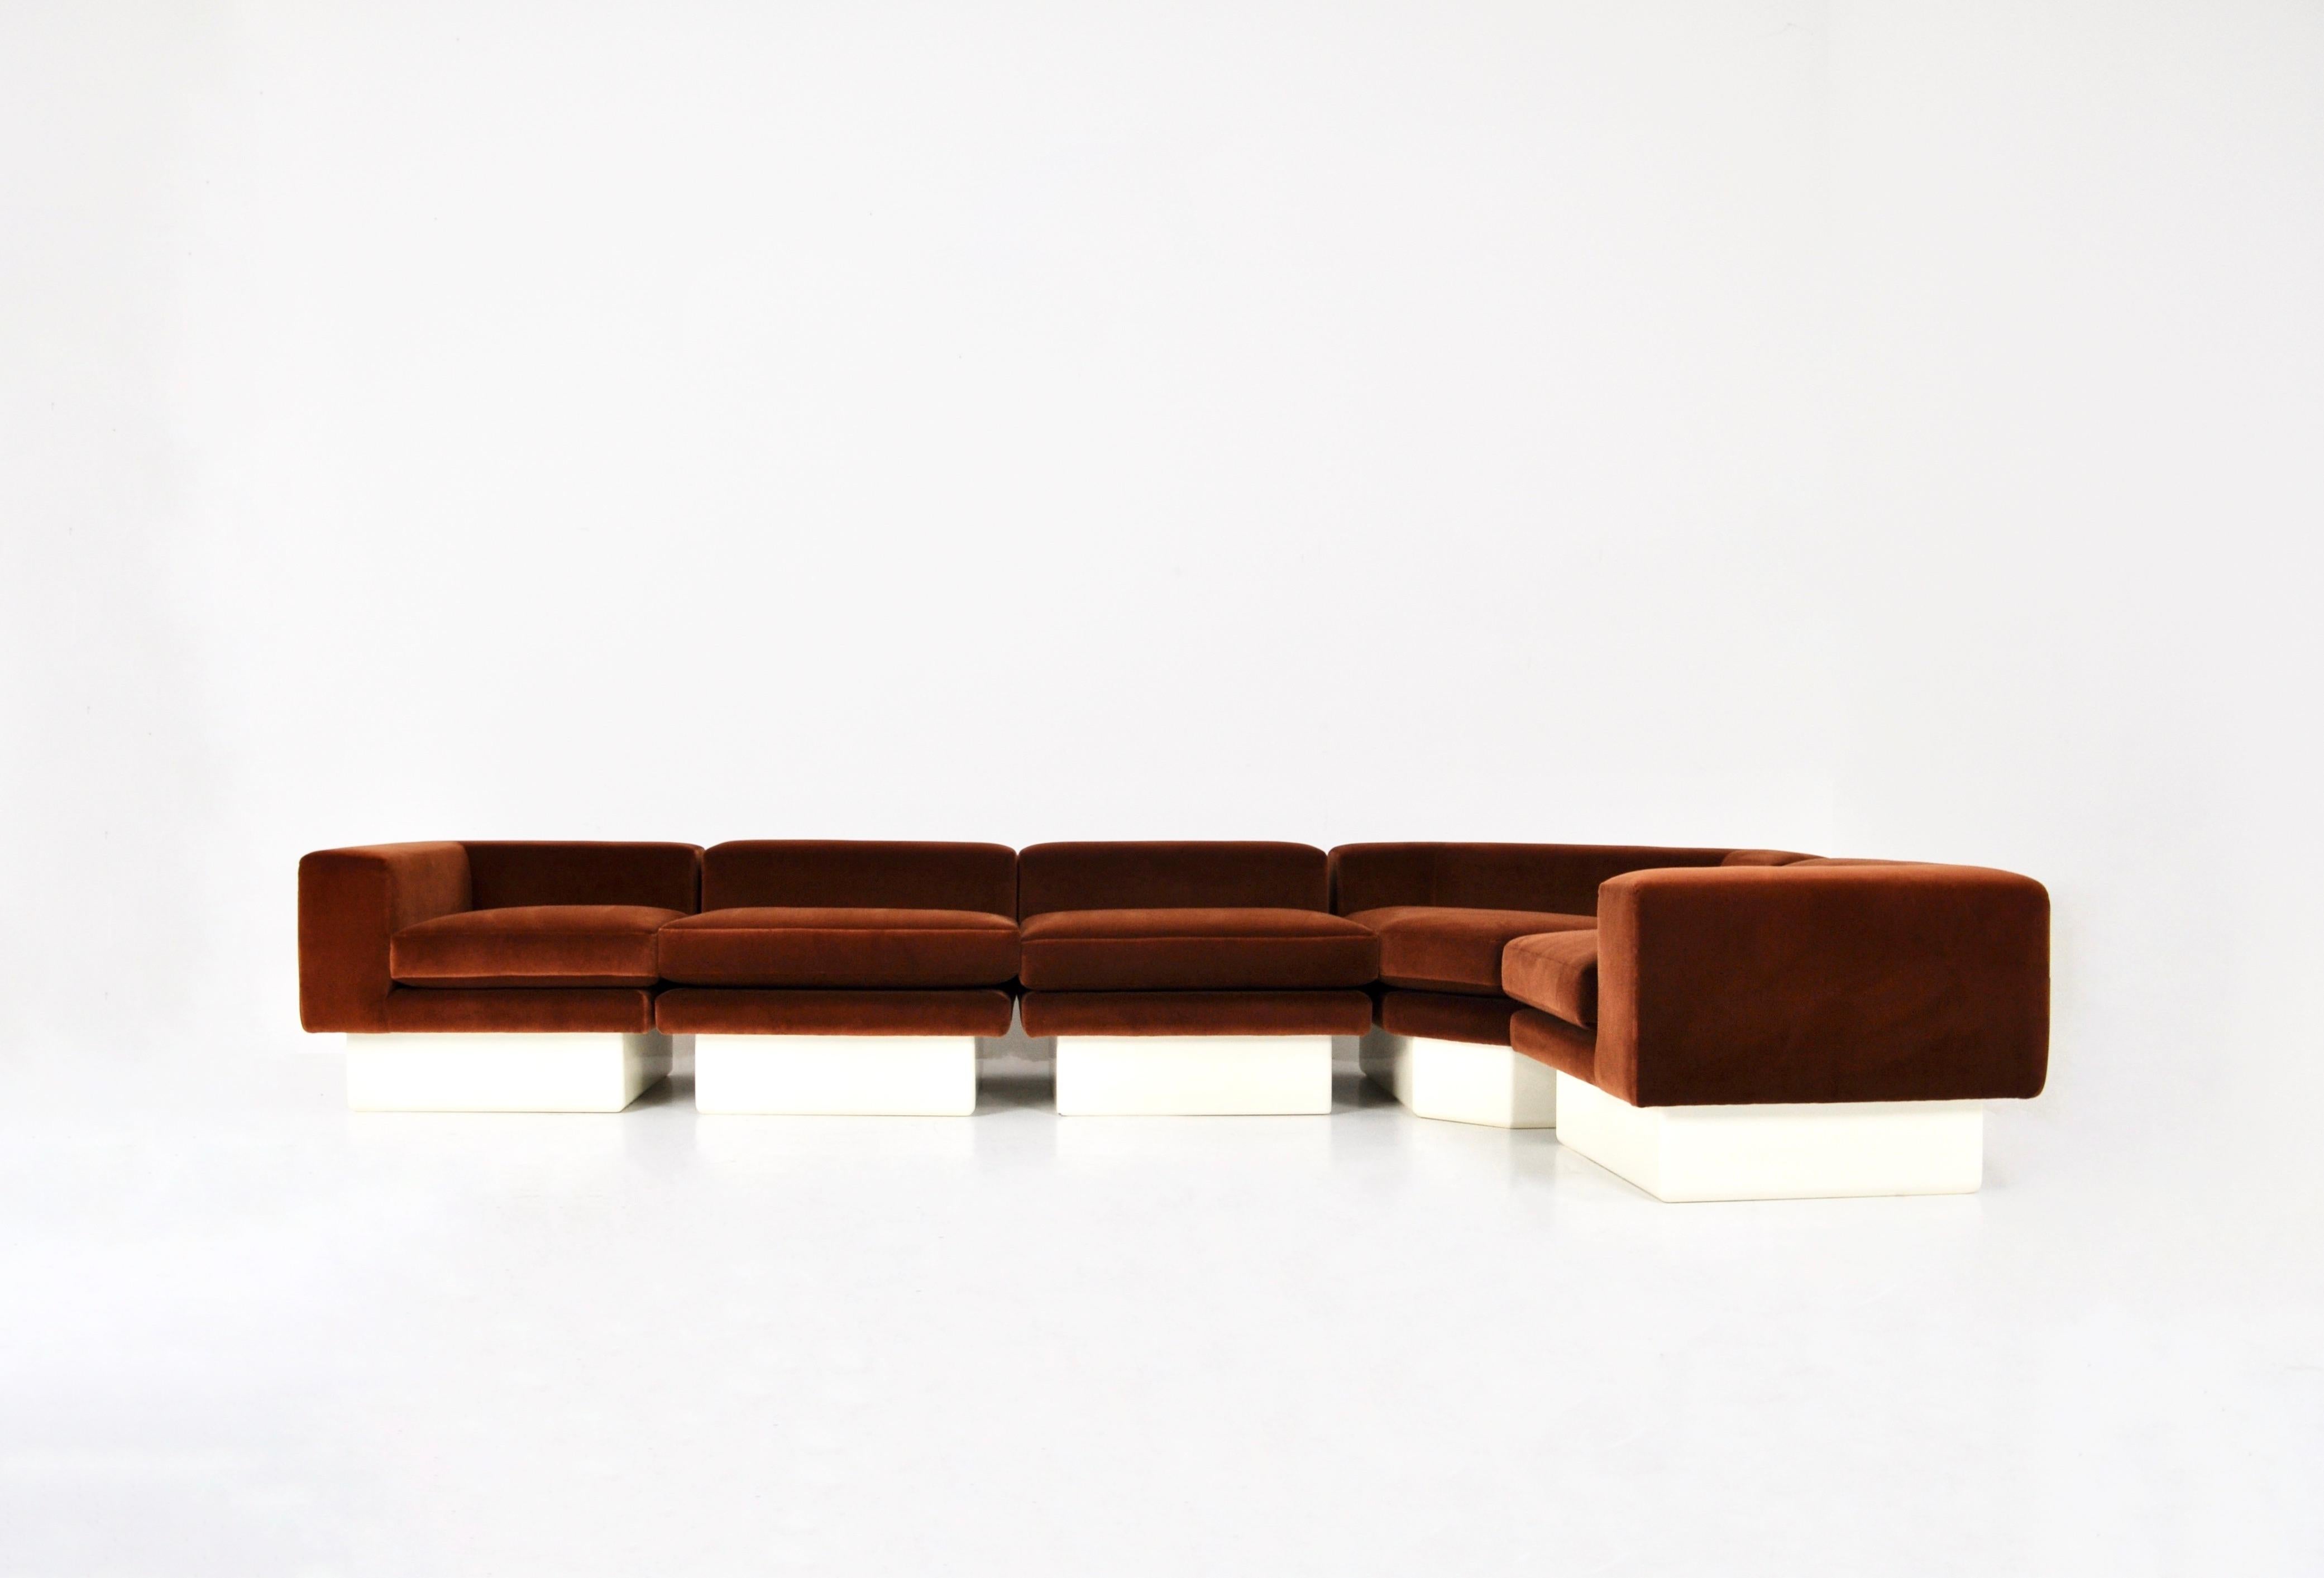 Modular sofa in brown suede and wood. Seat height 43 cm. One-piece dimensions: H: 60 cm W: 81 cm D: 81 cm. Corner dimensions: H: 60 cm W: 143 cm D: 81 cm. Wear due to time and age of sofa.
